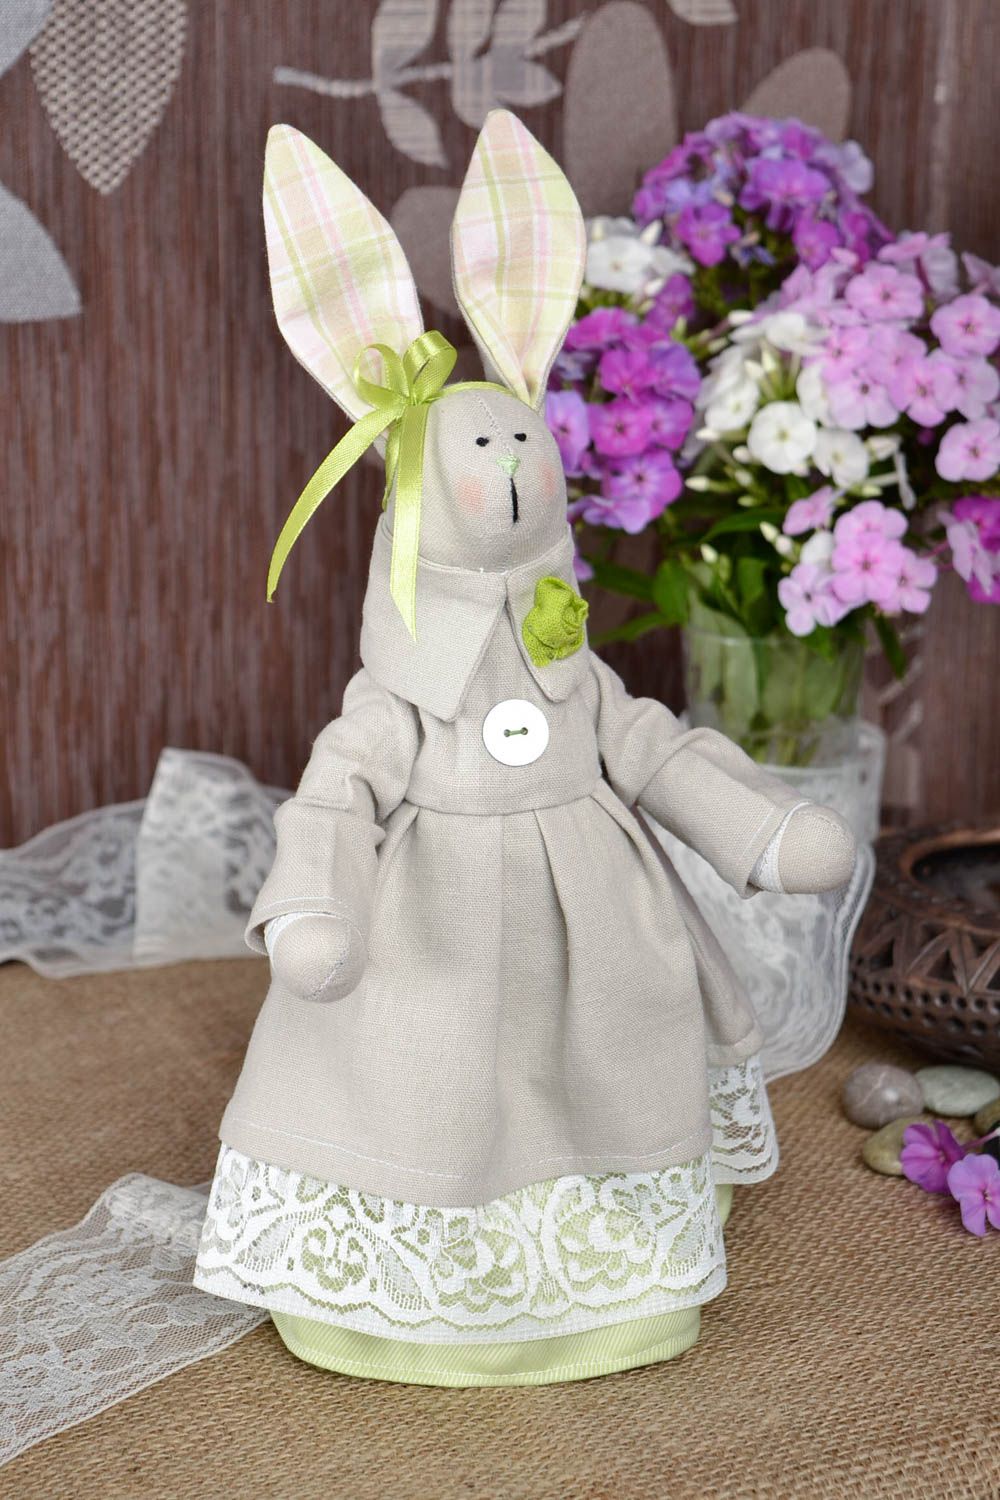 Rabbit toy soft toy homemade toys stuffed animals nursery decor gifts for kids photo 1